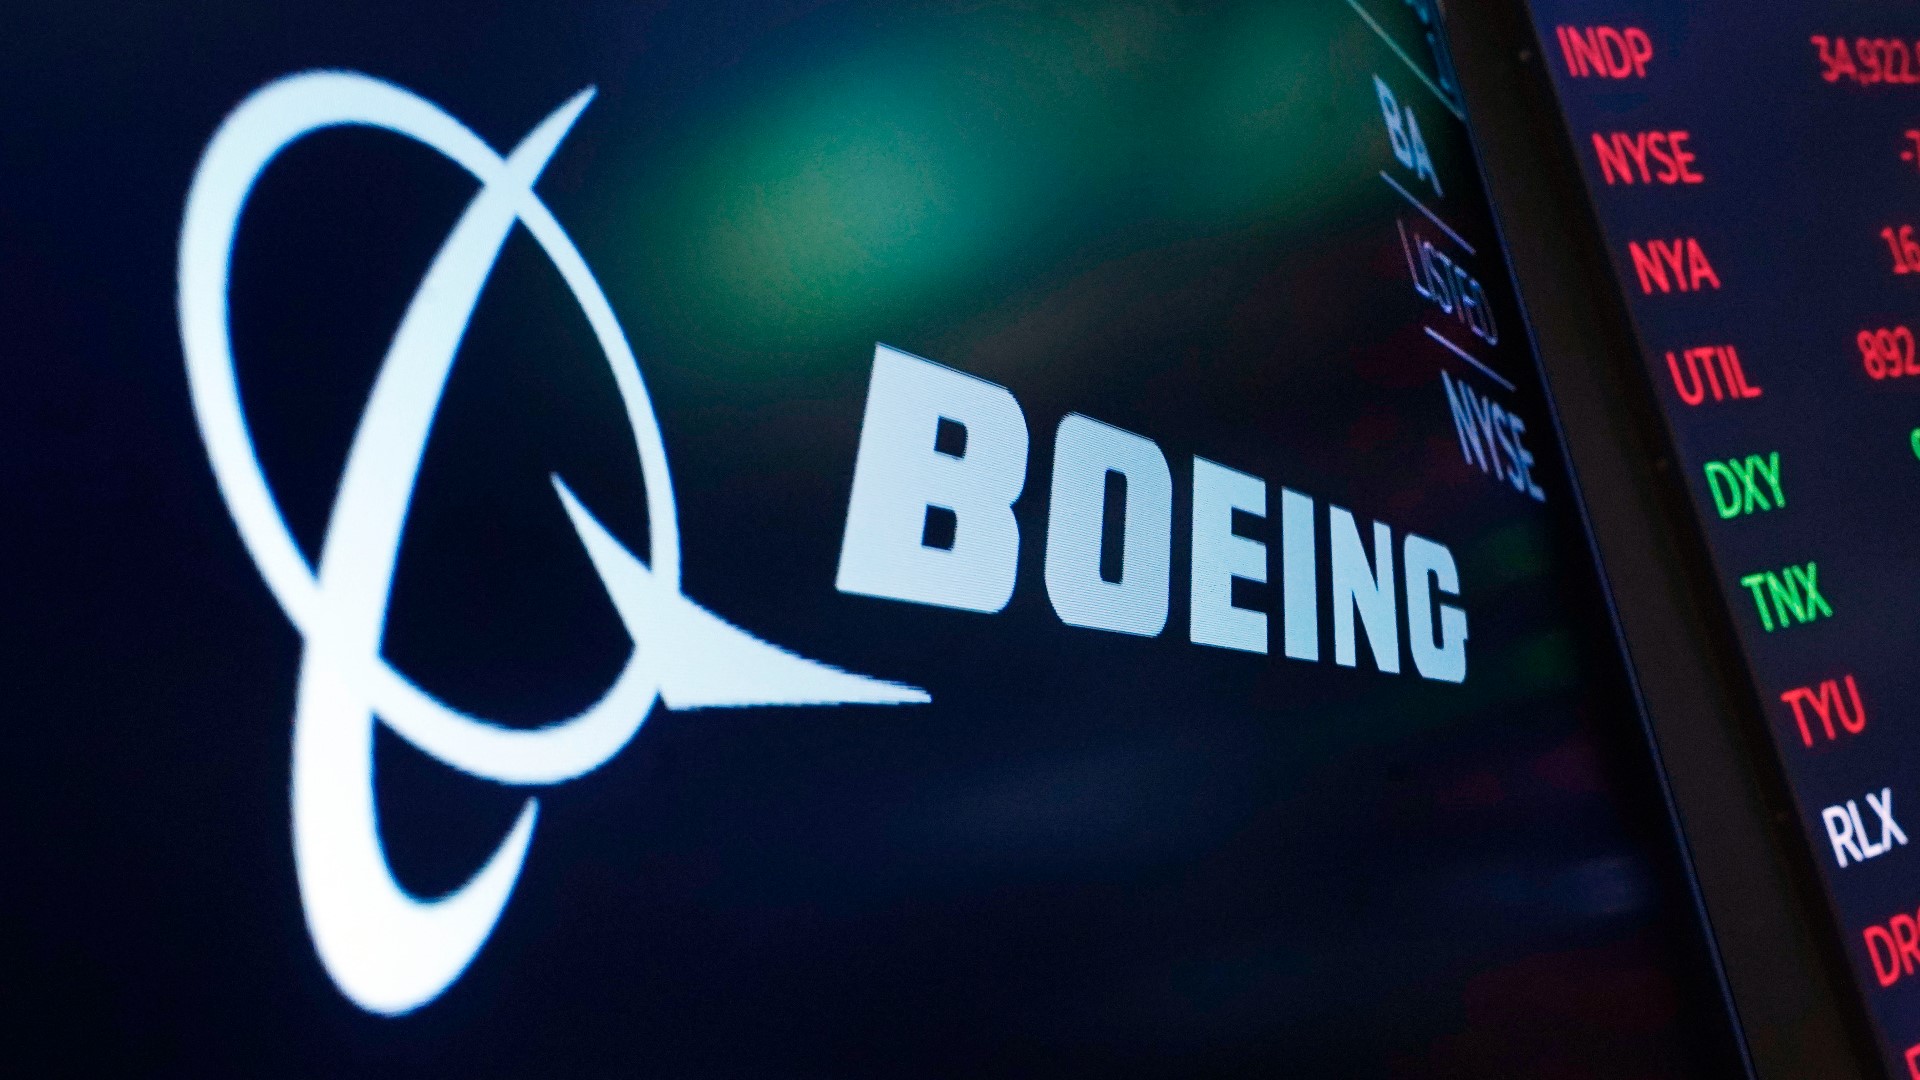 Boeing announced it will move its corporate headquarters from Chicago to its Arlington, Virginia campus just outside Washington, D.C.